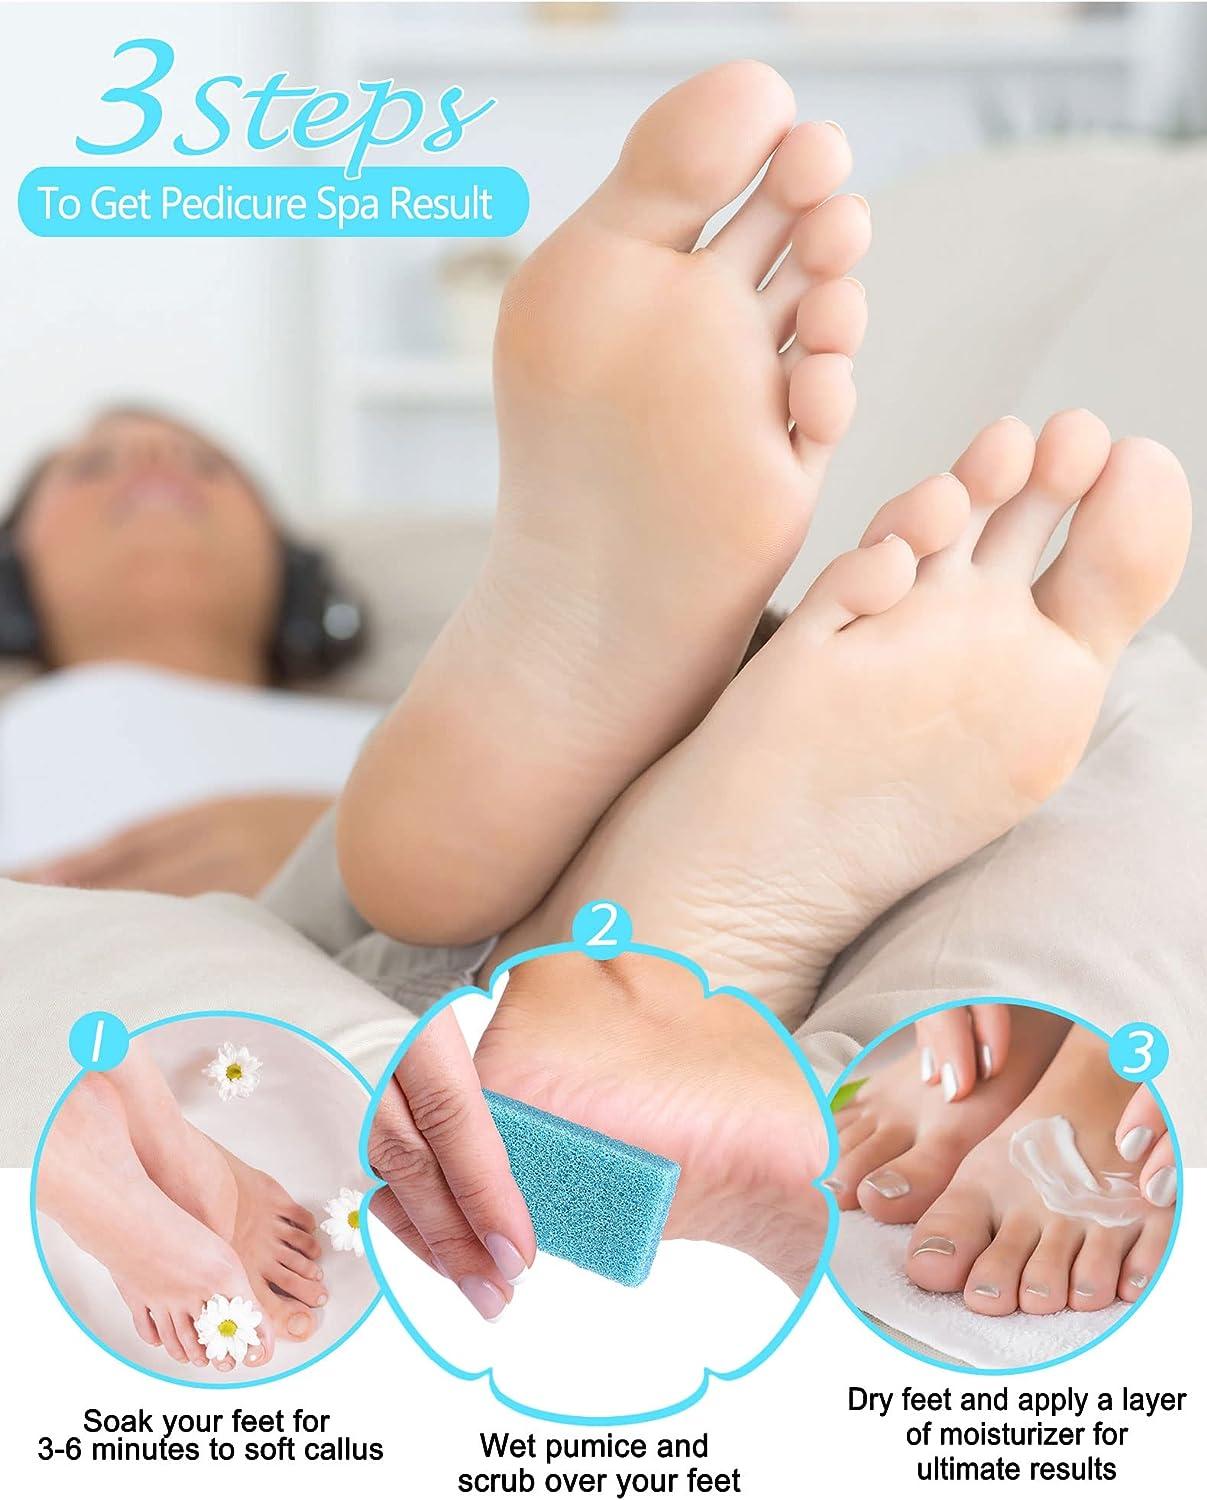 Pumice Stone for Feet Callus Remover Foot Scrubber Best Foot Care Pedicure  Tool to Exfoliate Hard Dry Skin 